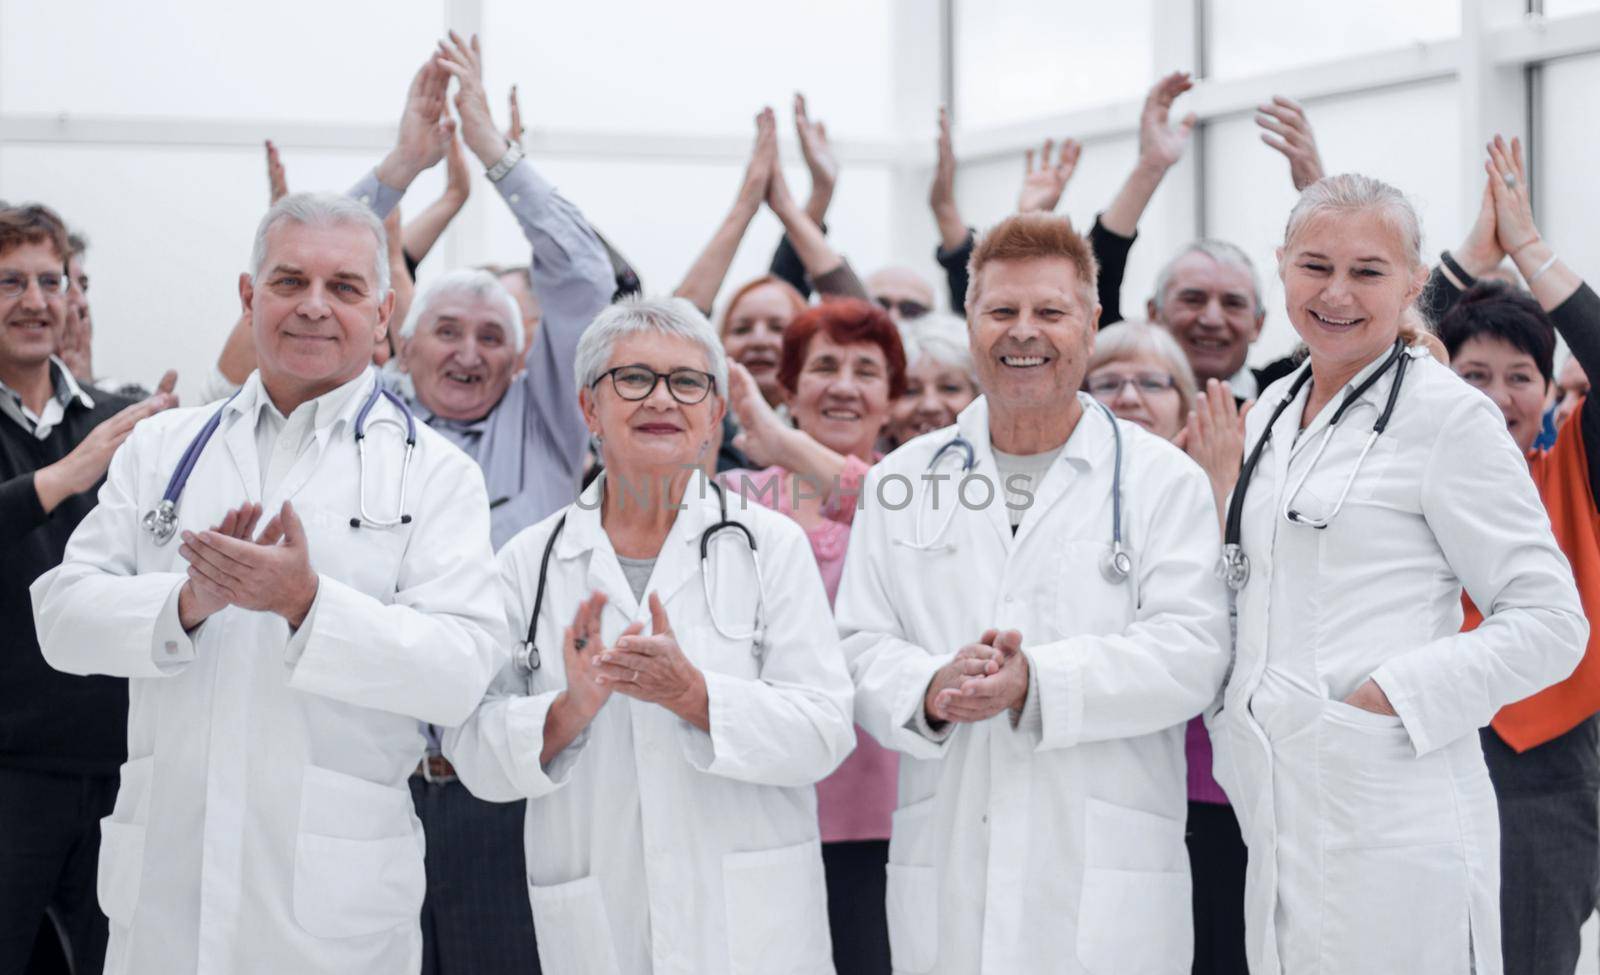 Group of the patients celebrate their recovery by asdf